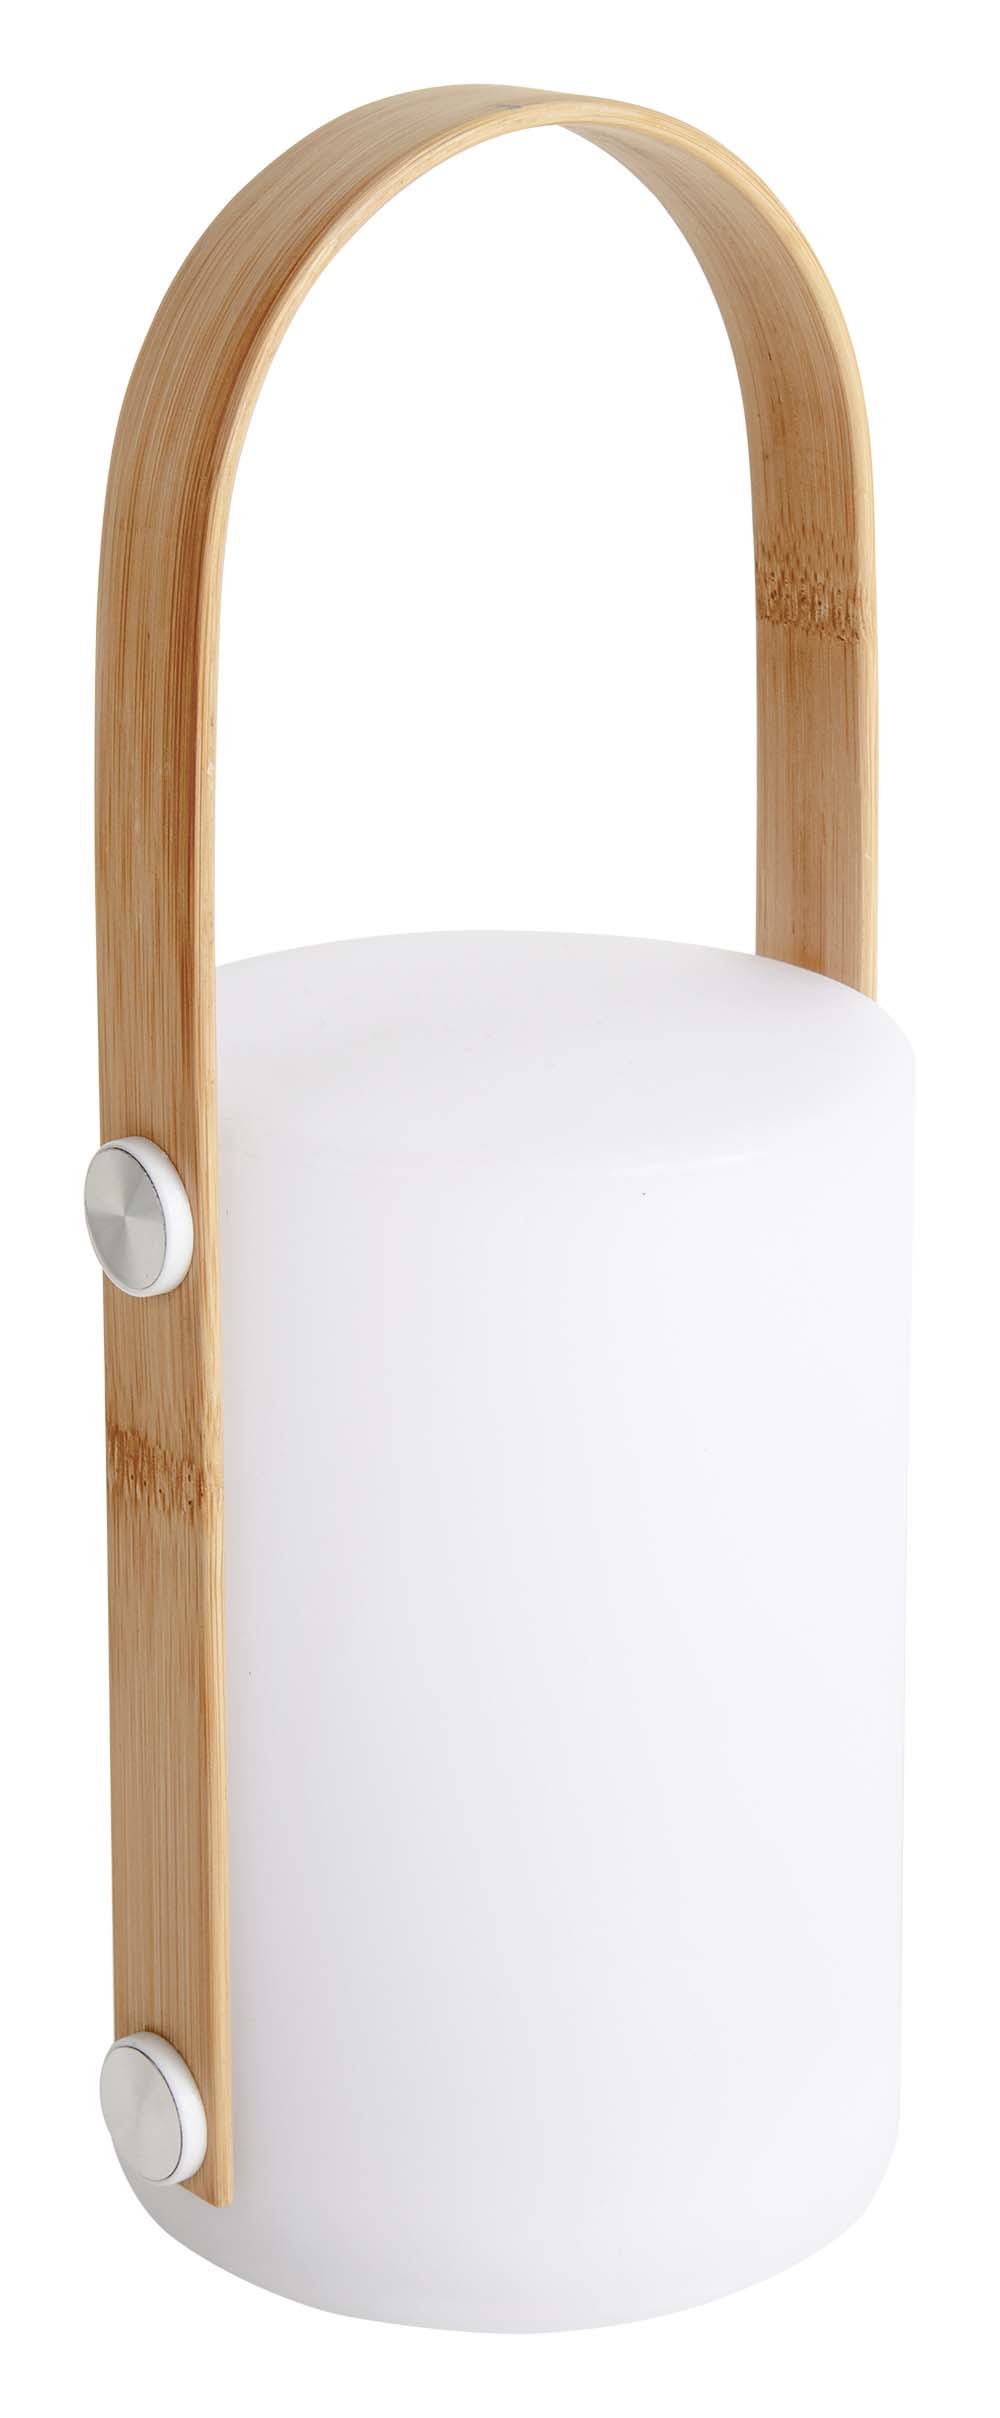 5818616 An atmospheric rechargeable table lamp with a stylish outdoor look. Gives a pleasant light by the warm white LED lighting. Equipped with 3 light modes, a plastic housing and a bamboo handle. The built-in Li-ion battery can be charged with an included USB cable. Ideal for on a table or cabinet.